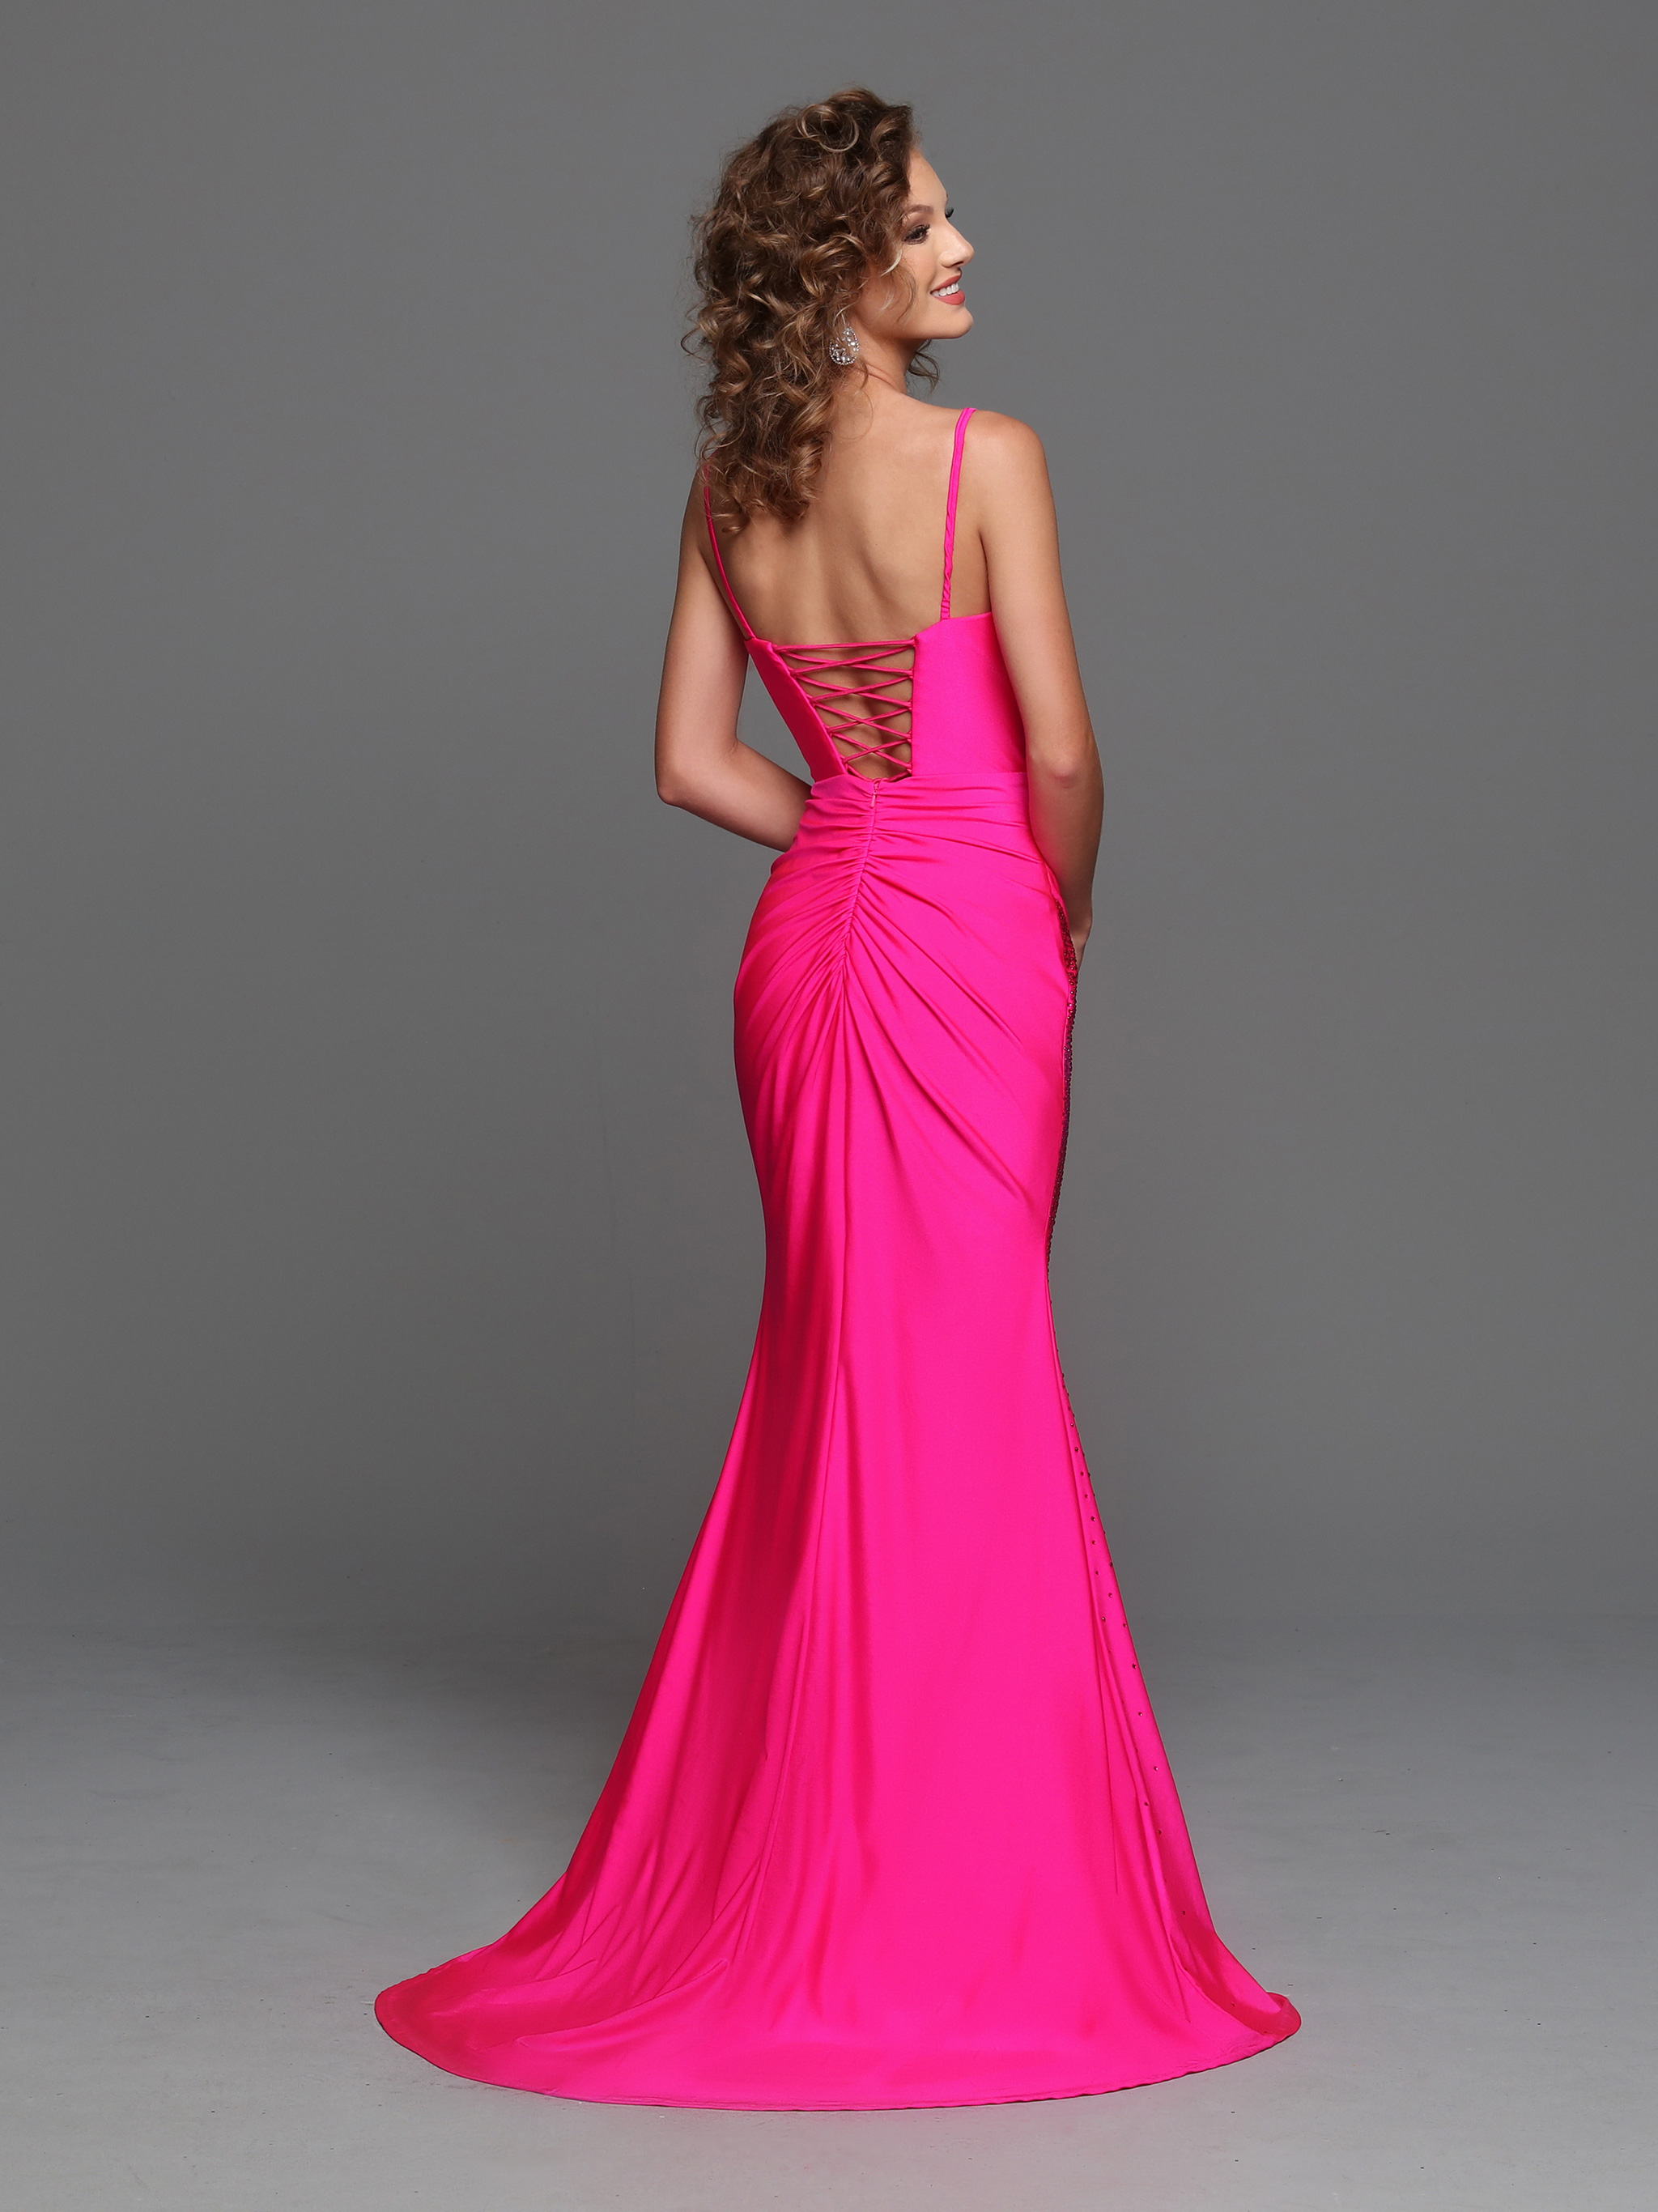 Image showing back view of style #72247